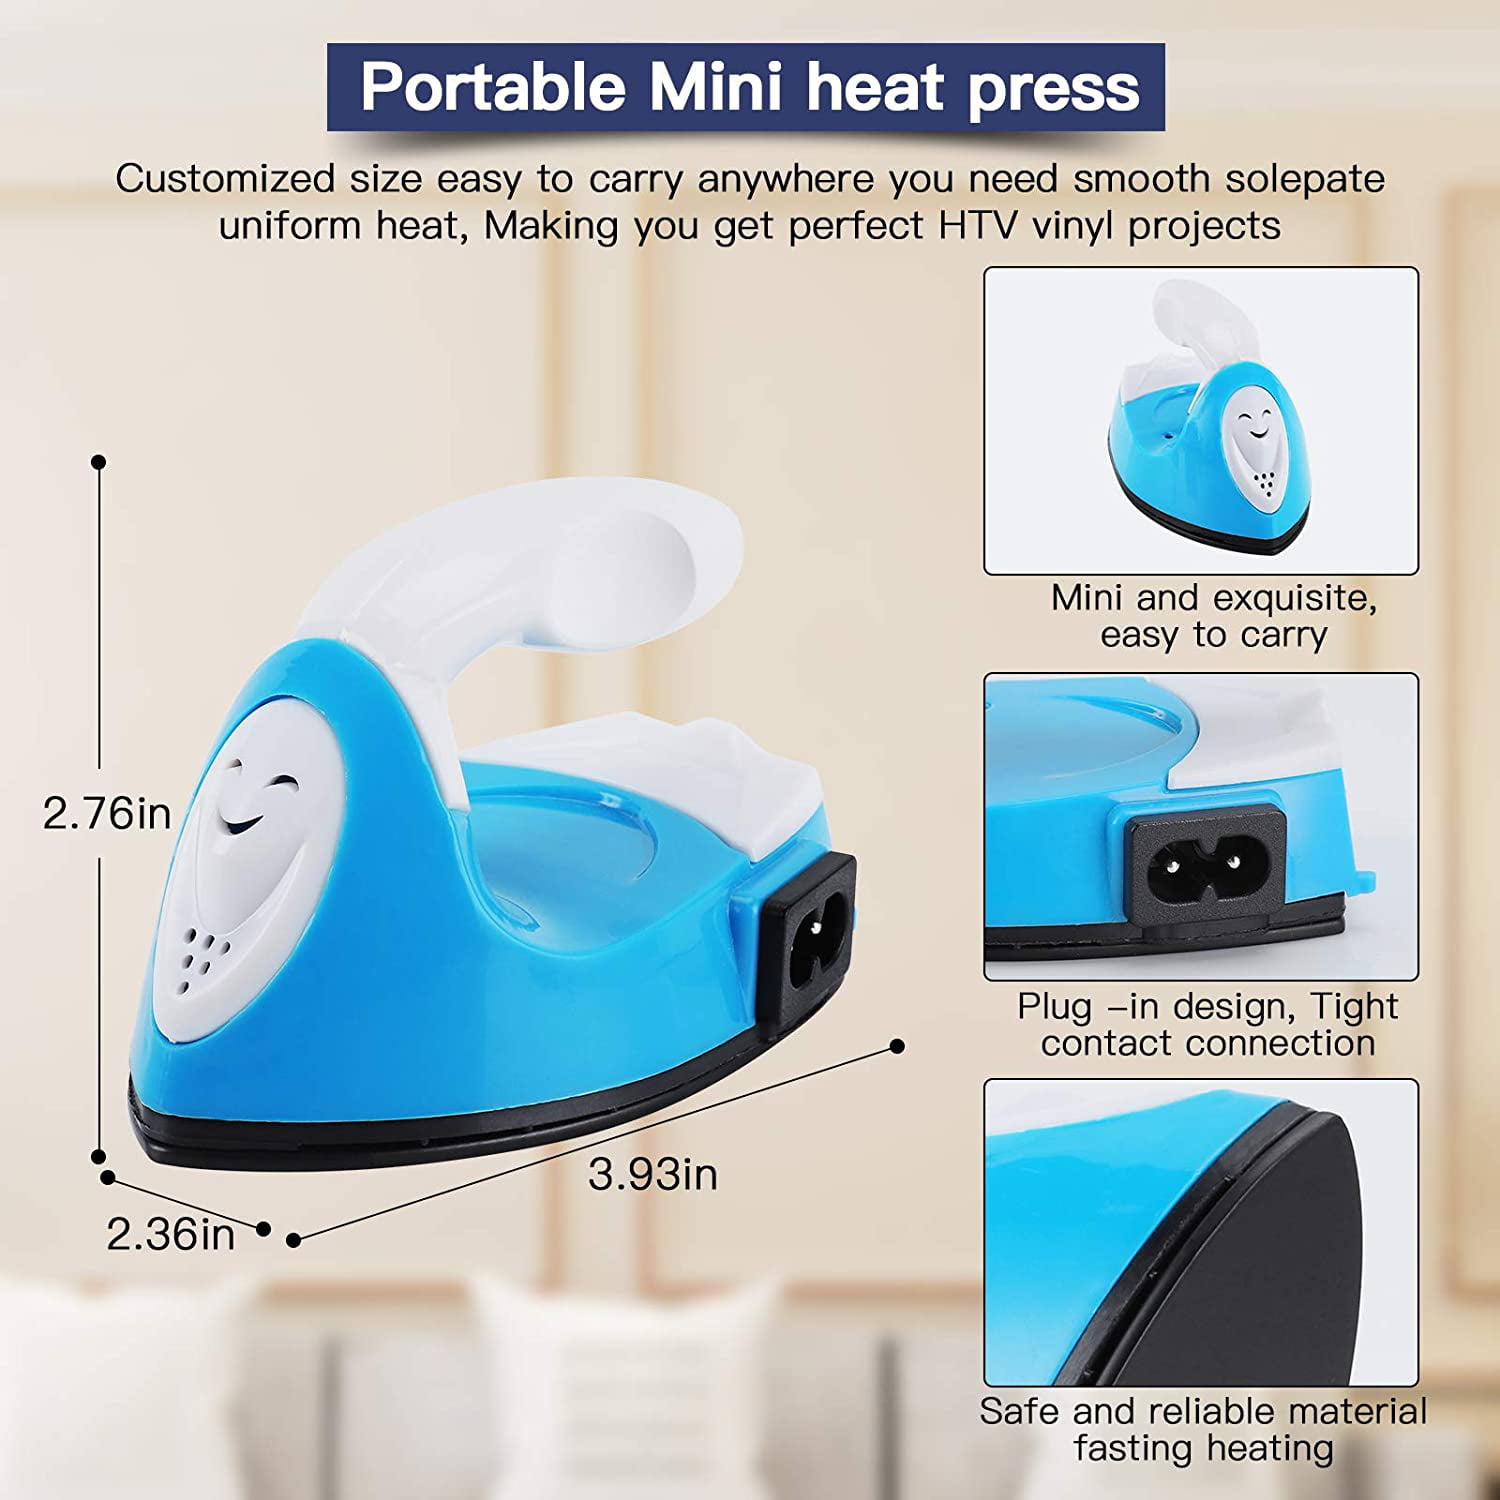 Handy Heat Pressing Machine for Clothes DIY T Shirts Shoes Hats Small HTV Vinyl Projects with Charging Portable Mini Electric Iron for Heating Transfer Heat Press Stickers Included 